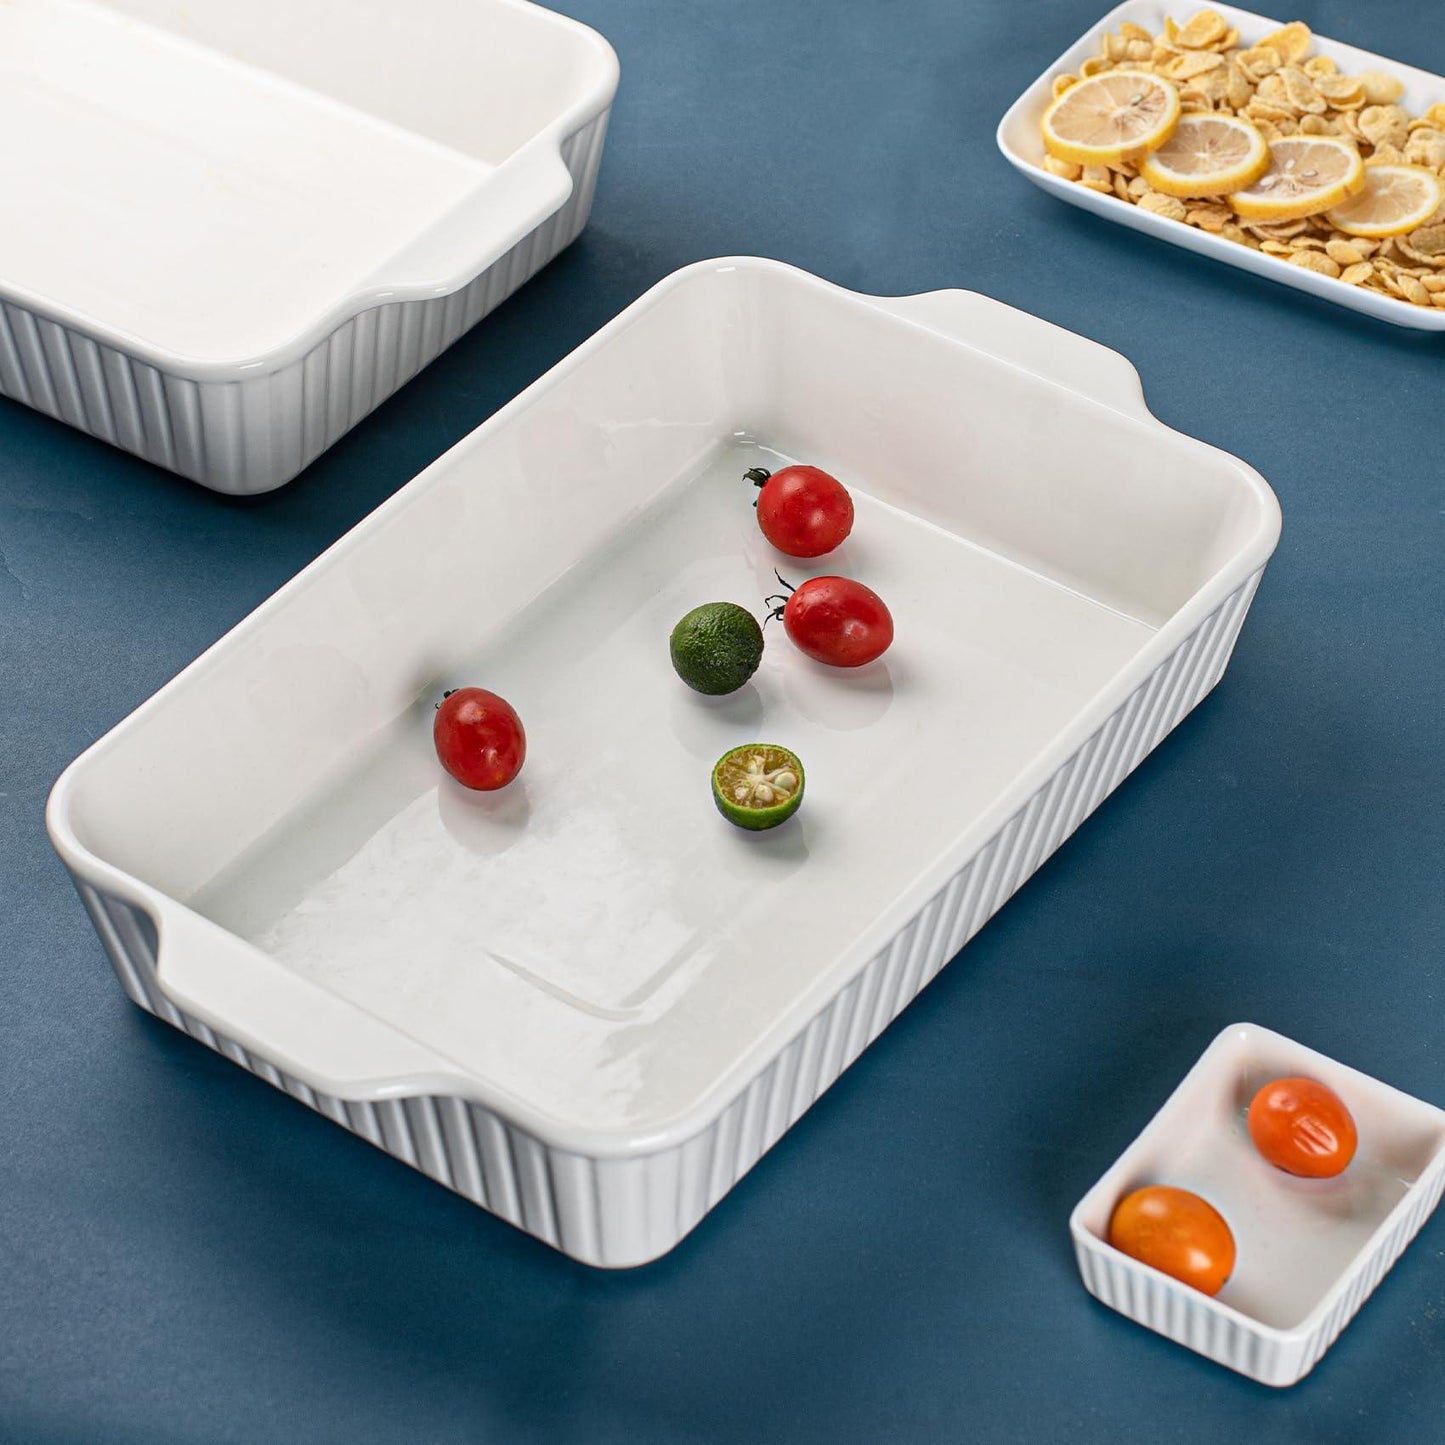 Casserole Dishes for Oven 9x13,2 Pack Ceramic Baking Dish Large & Deep,135 OZ Casserole Dish Set with Handles Durable Bakeware for Lasagna, Roasts, Cake Cooking, Lasagna Pan Sets Nonstick-Microwave - CookCave